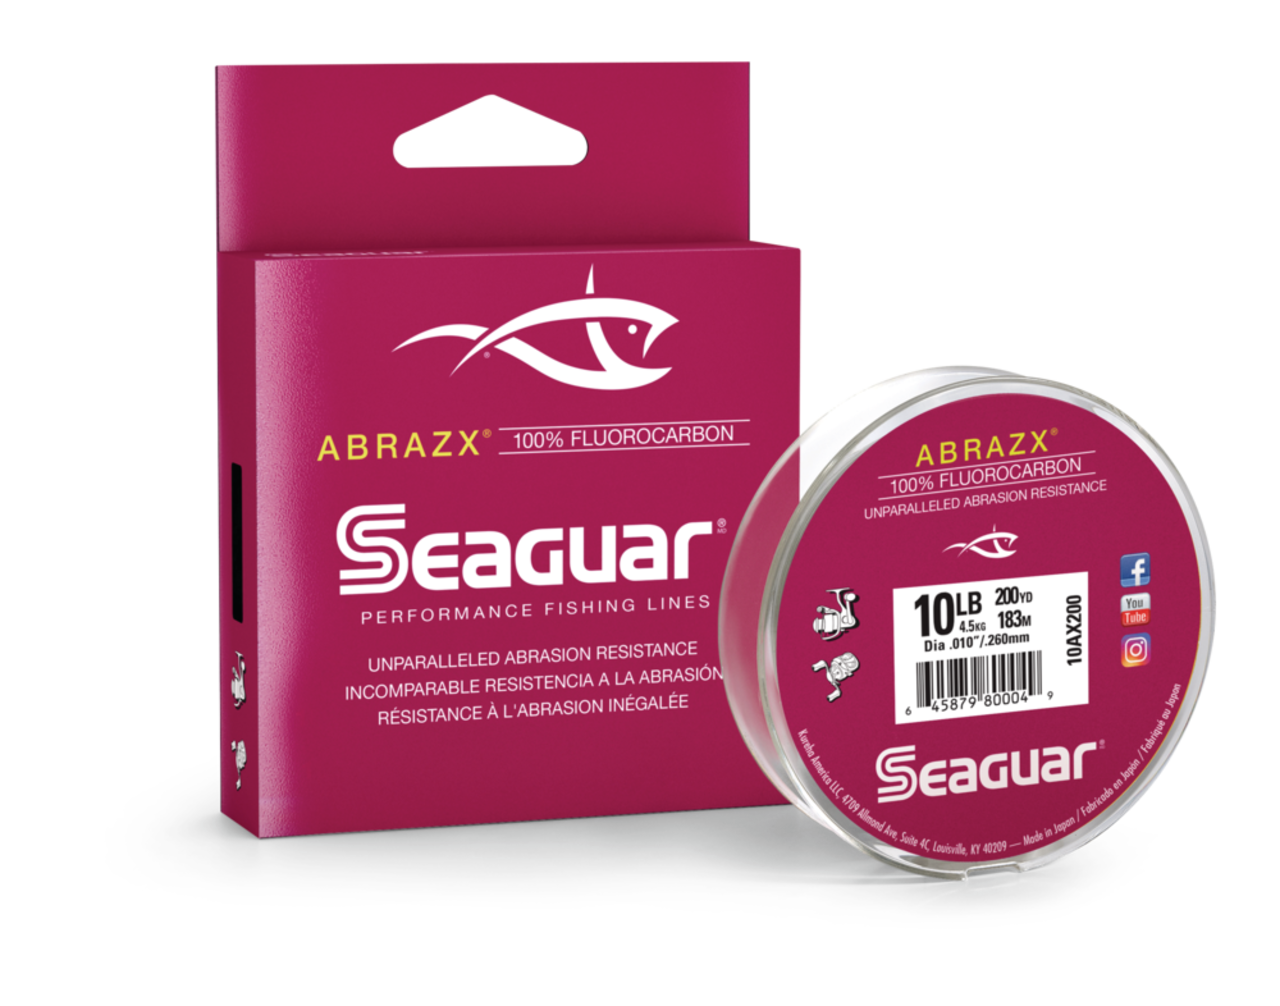 Seaguar Red Label 6 Lb 200 Yards Fluorocarbon Fishing Line Clear